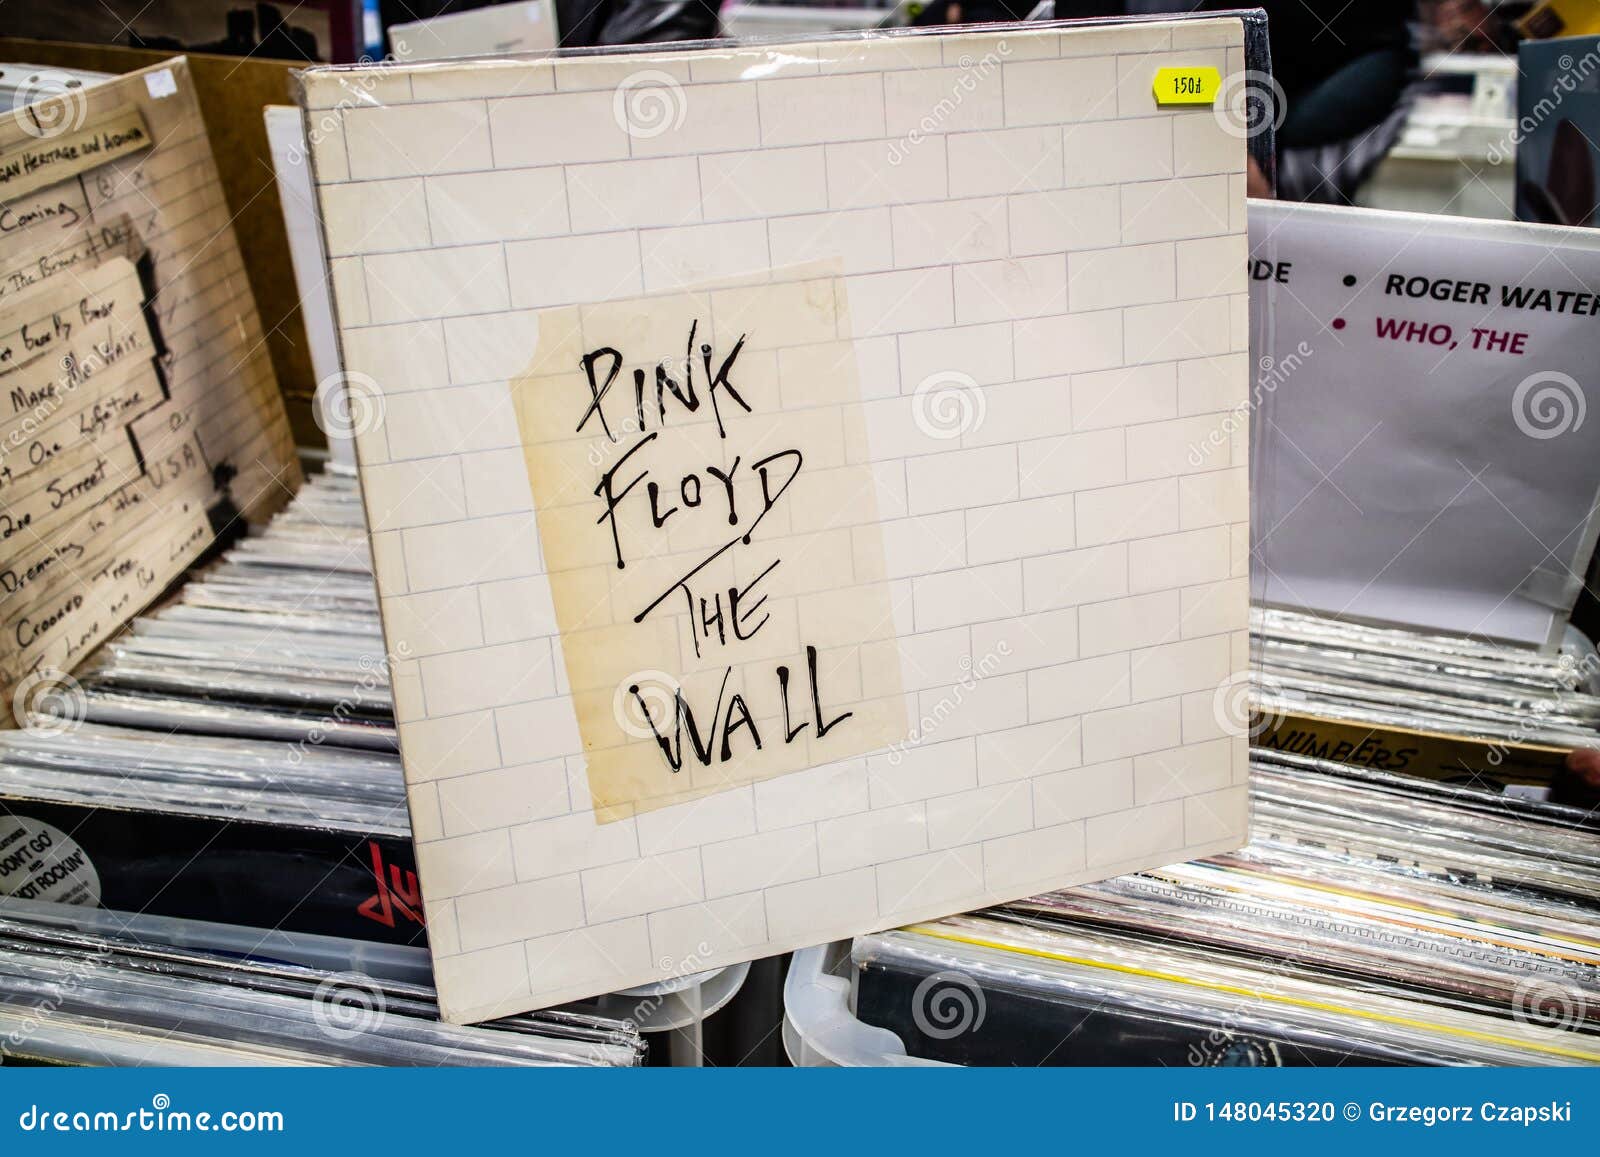 where can i download pink floyd the wall album